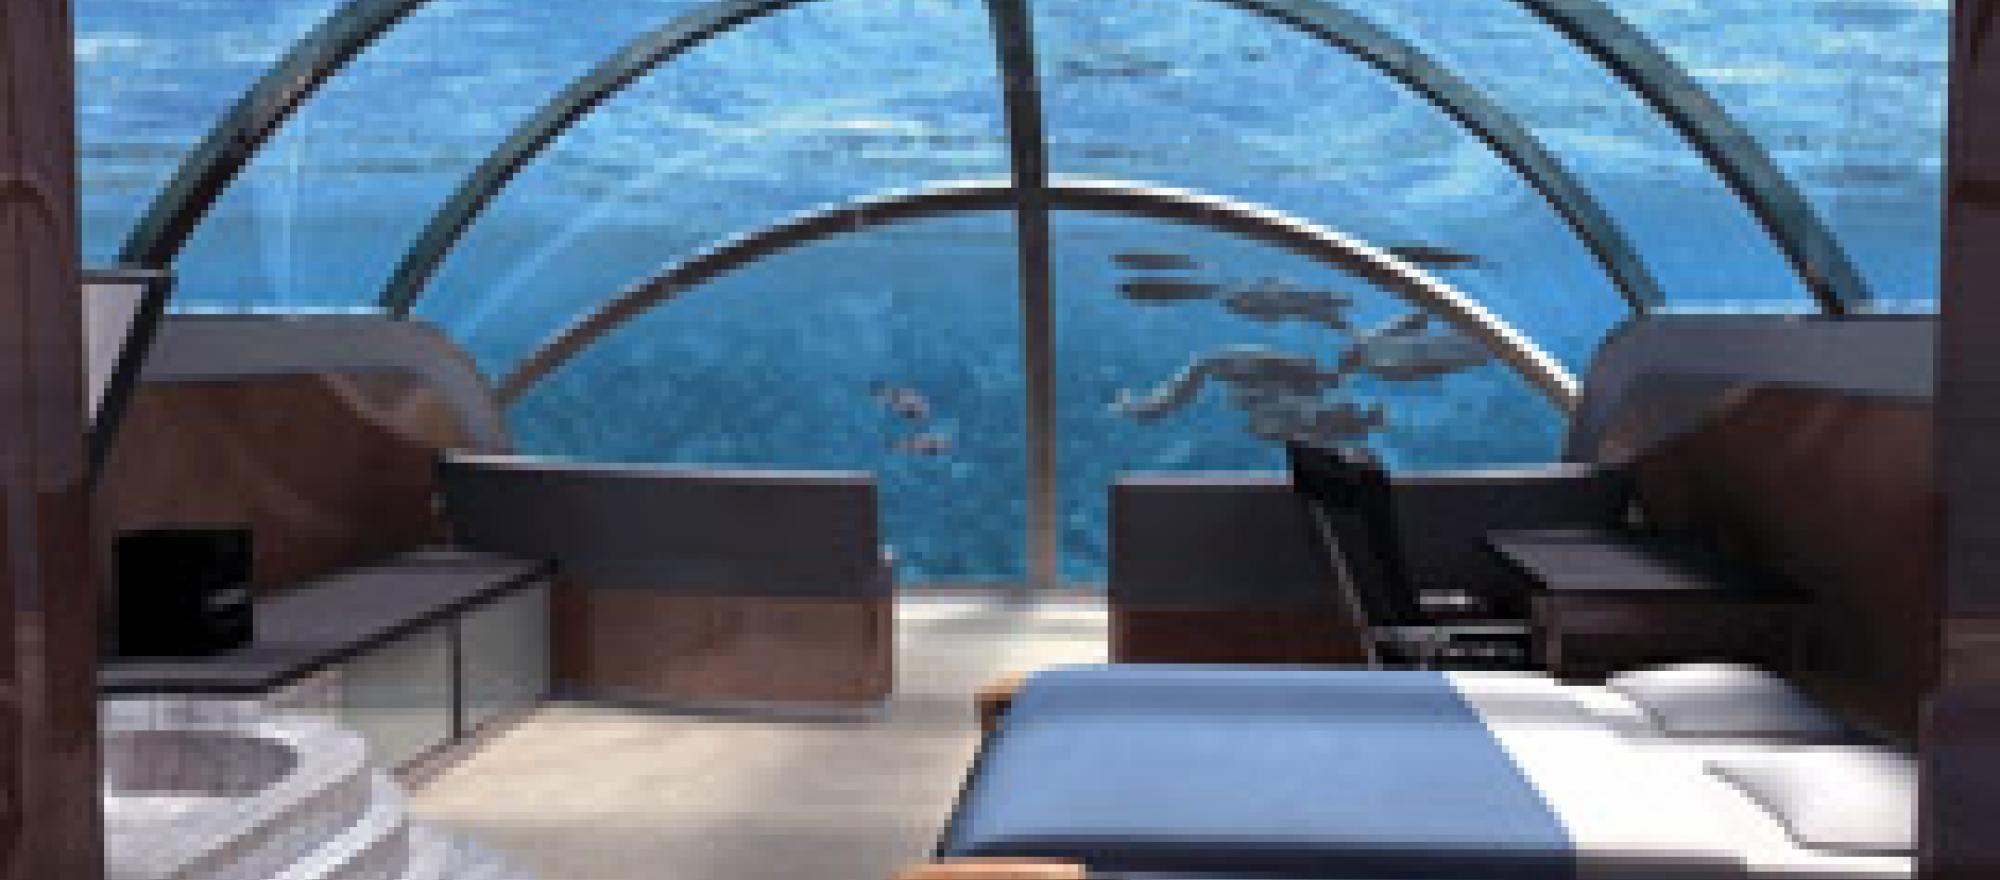 One glance out your window at Florida's Jules Undersea Lodge should be enough